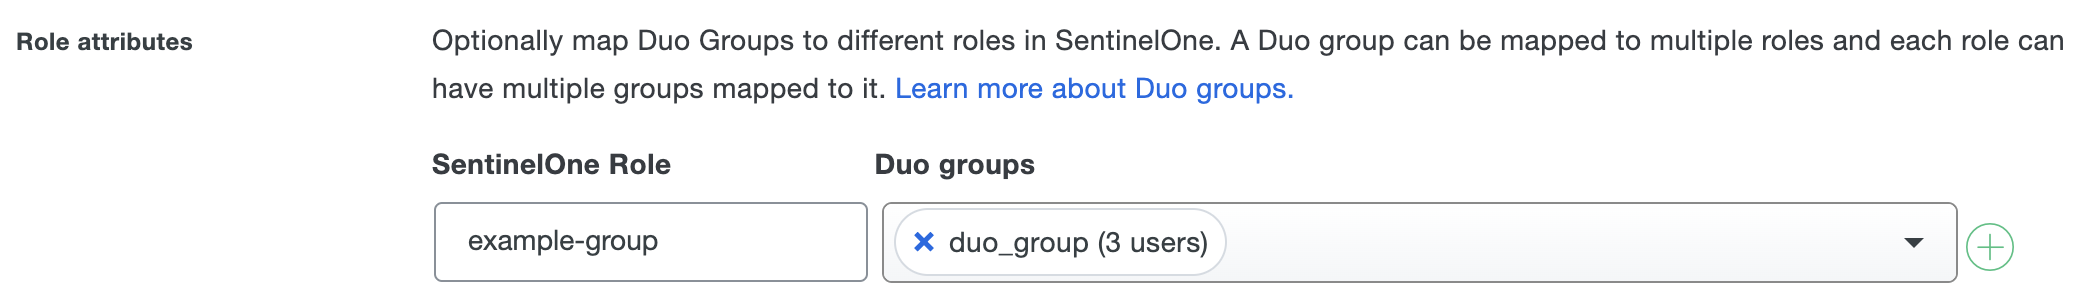 Duo SentinelOne Group Mapping Fields